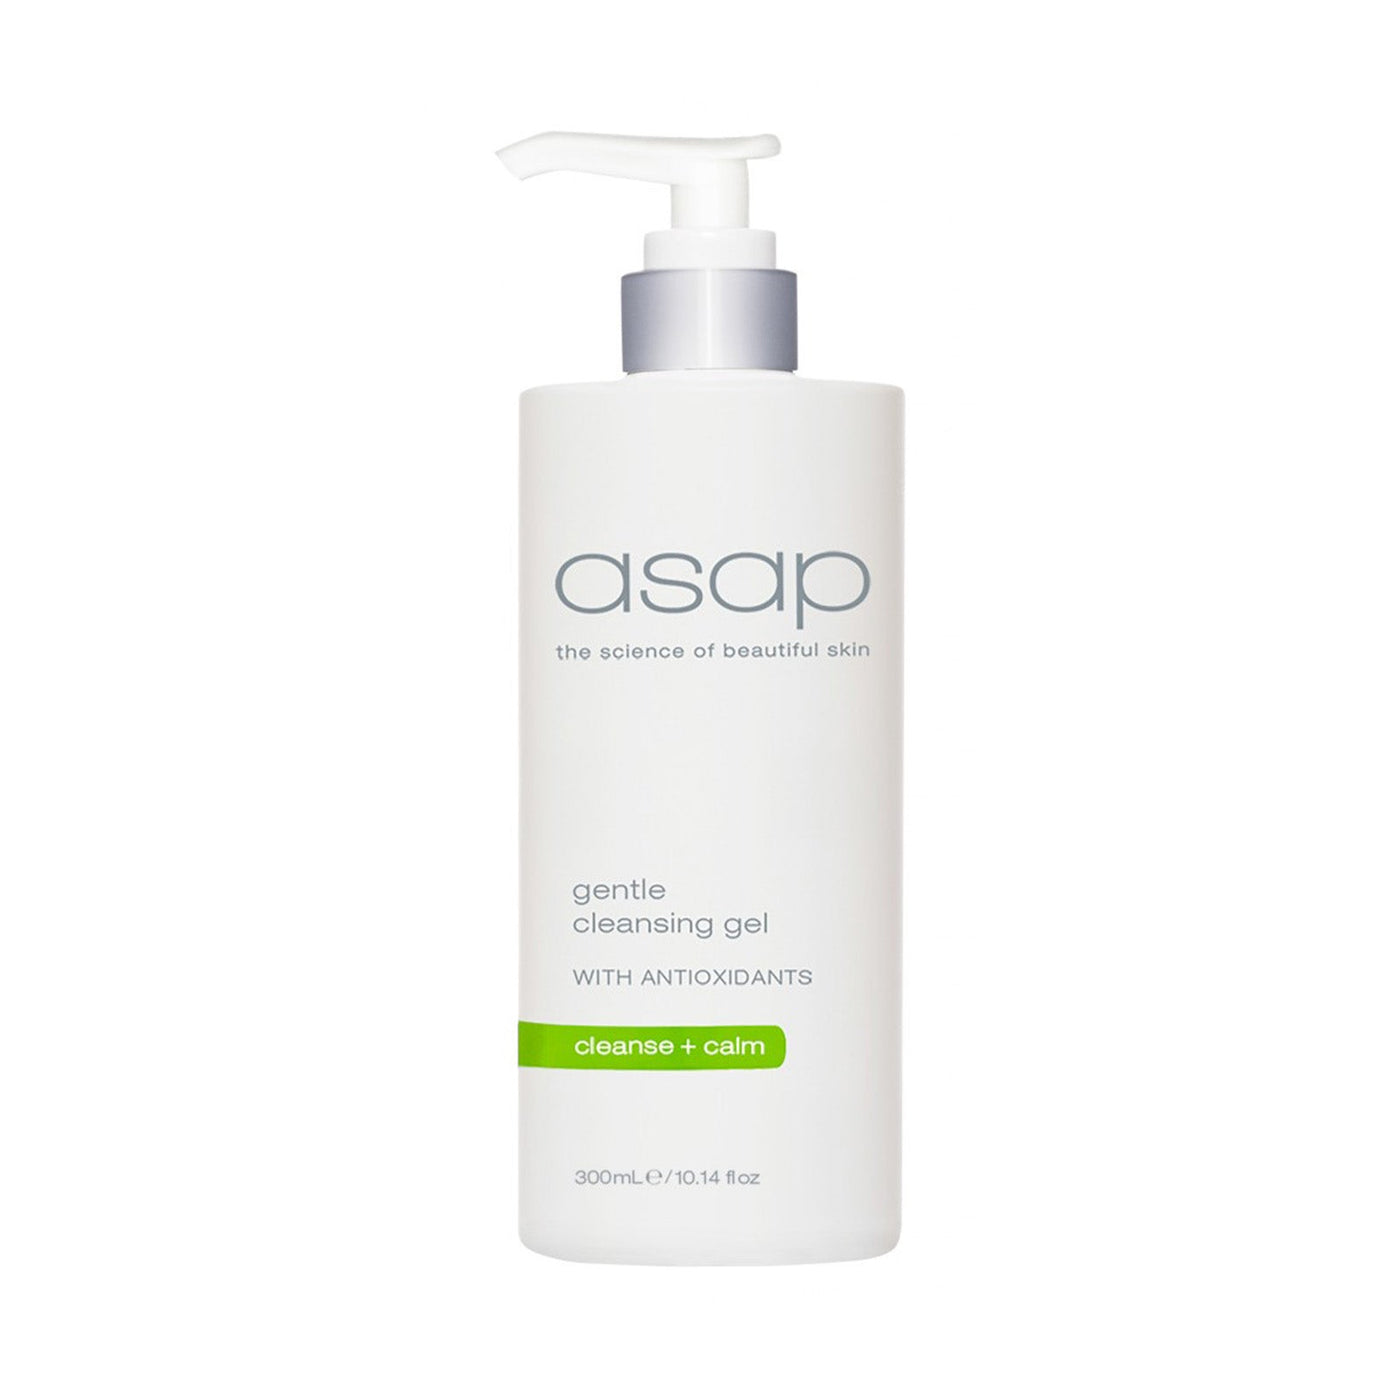 asap Gentle Cleansing Gel (300ml) - Limited Edition